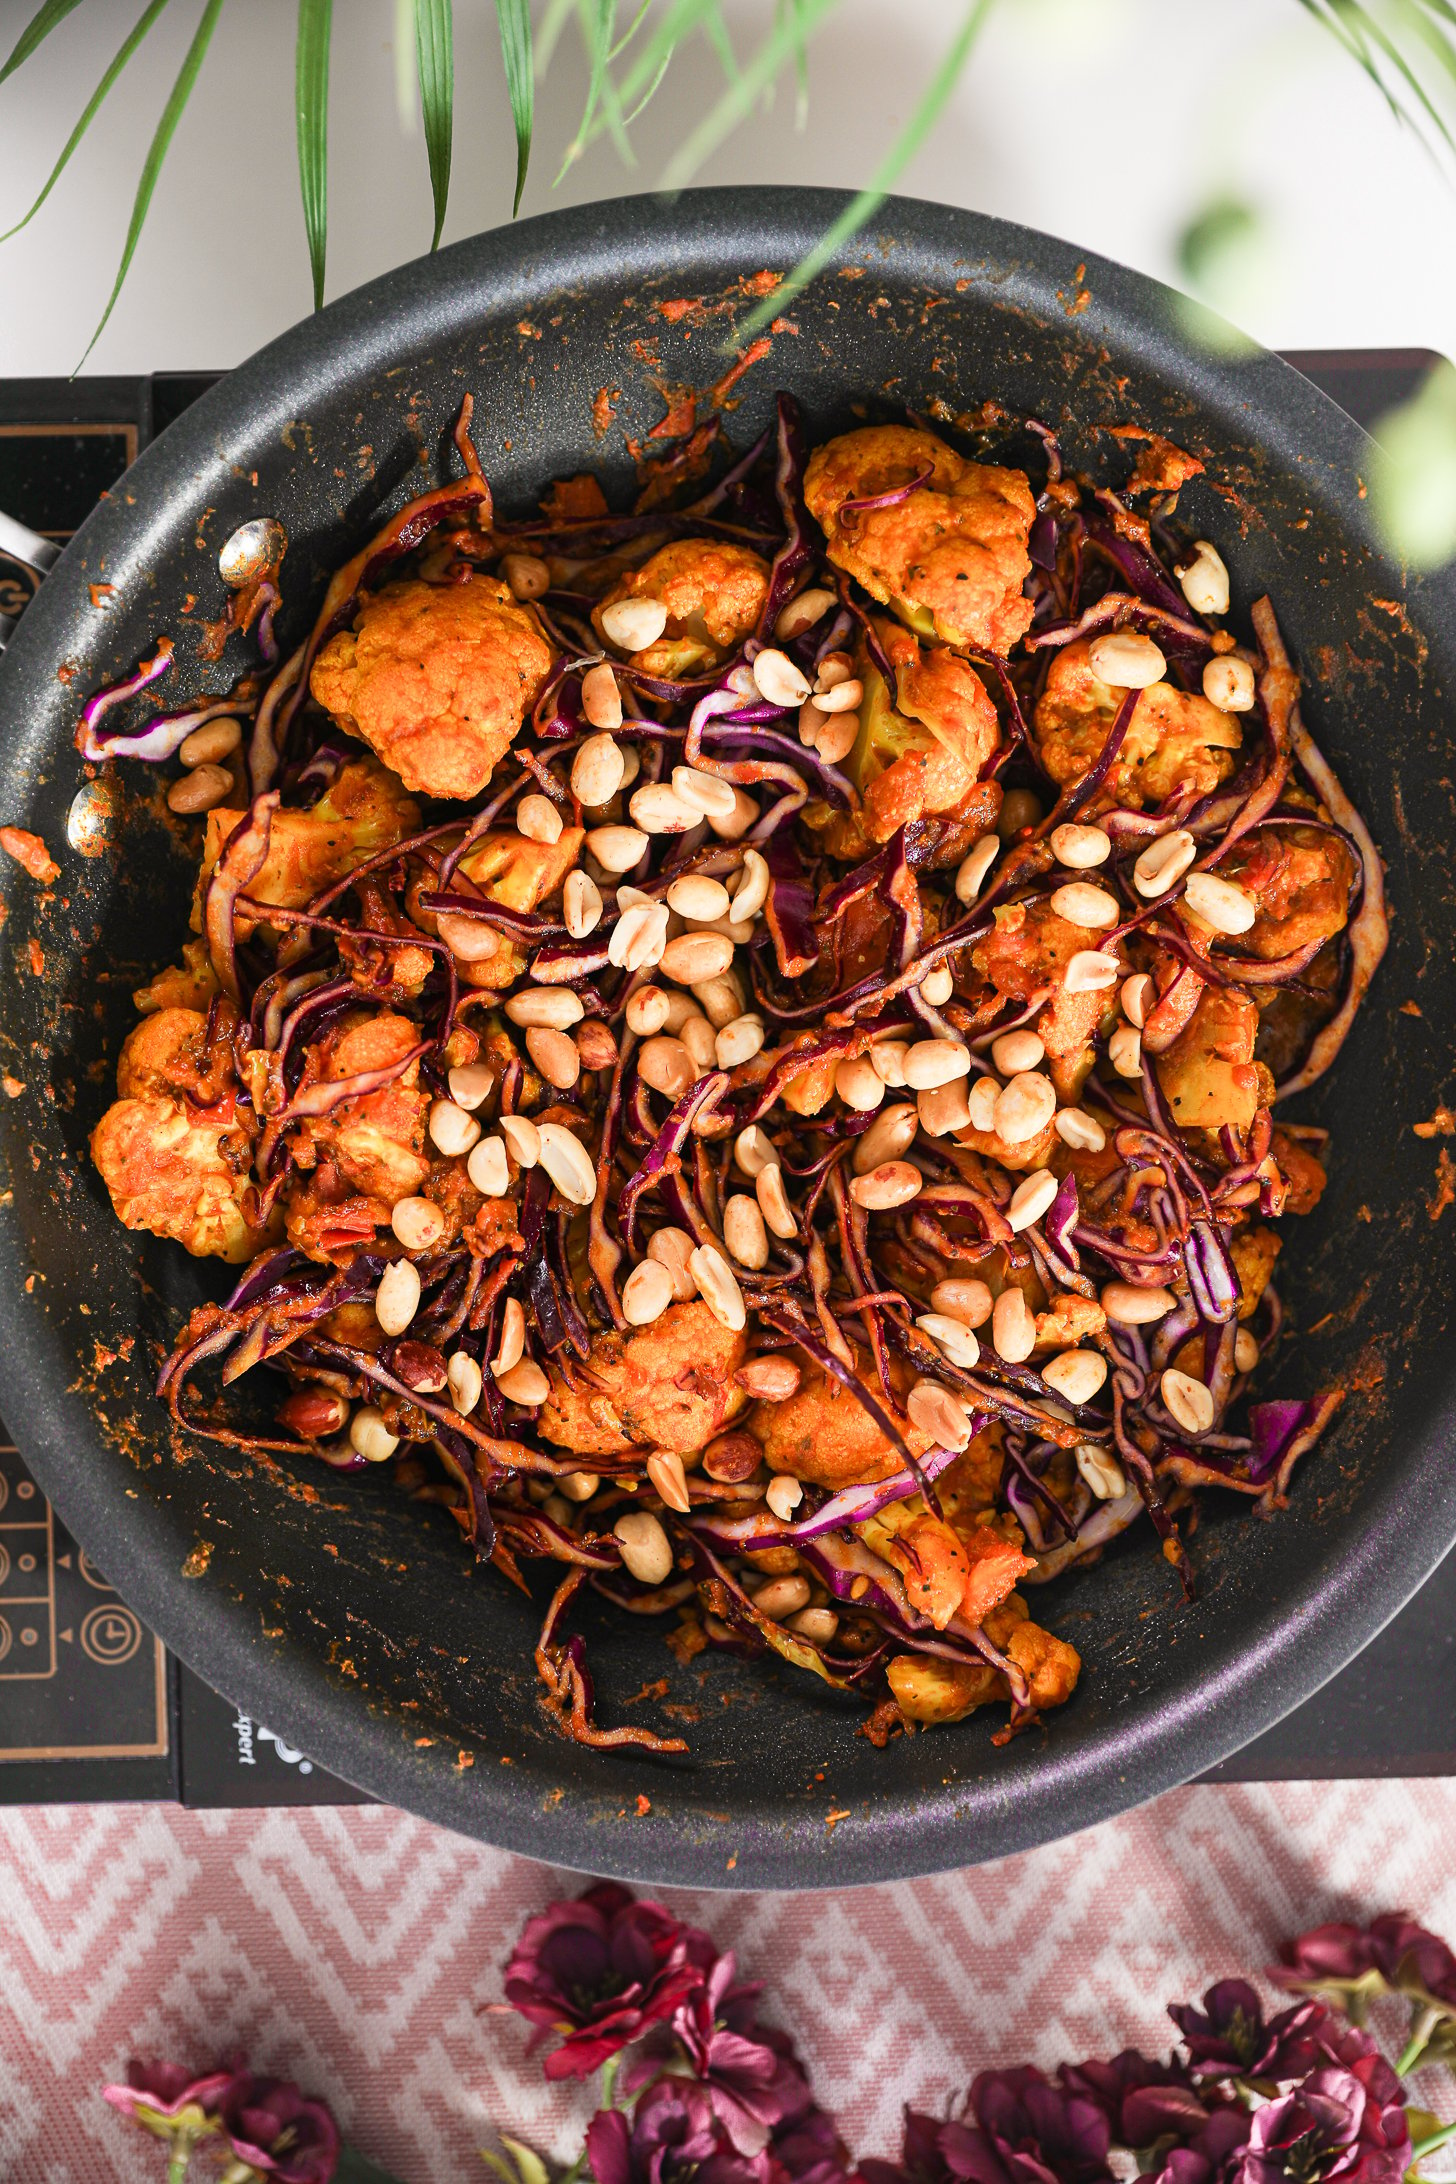 A pan of stir fried cabbage and cauliflower topped with peanuts on a mobile worktop.